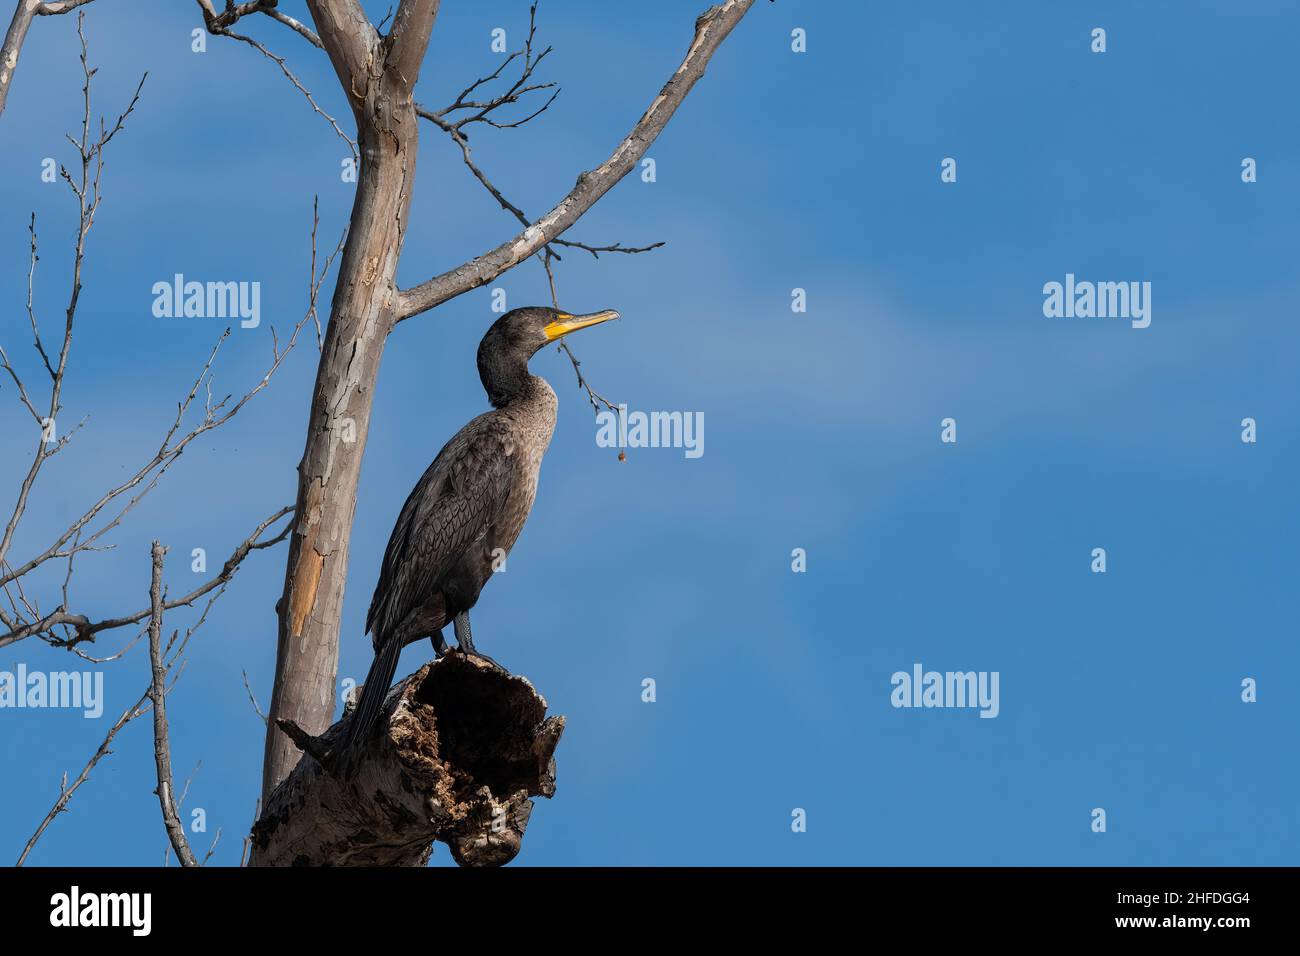 A beautiful Double-crested Cormorant standing majestically and looking off into the distance while perched on a dead branch high overhead in a bare tr Stock Photo